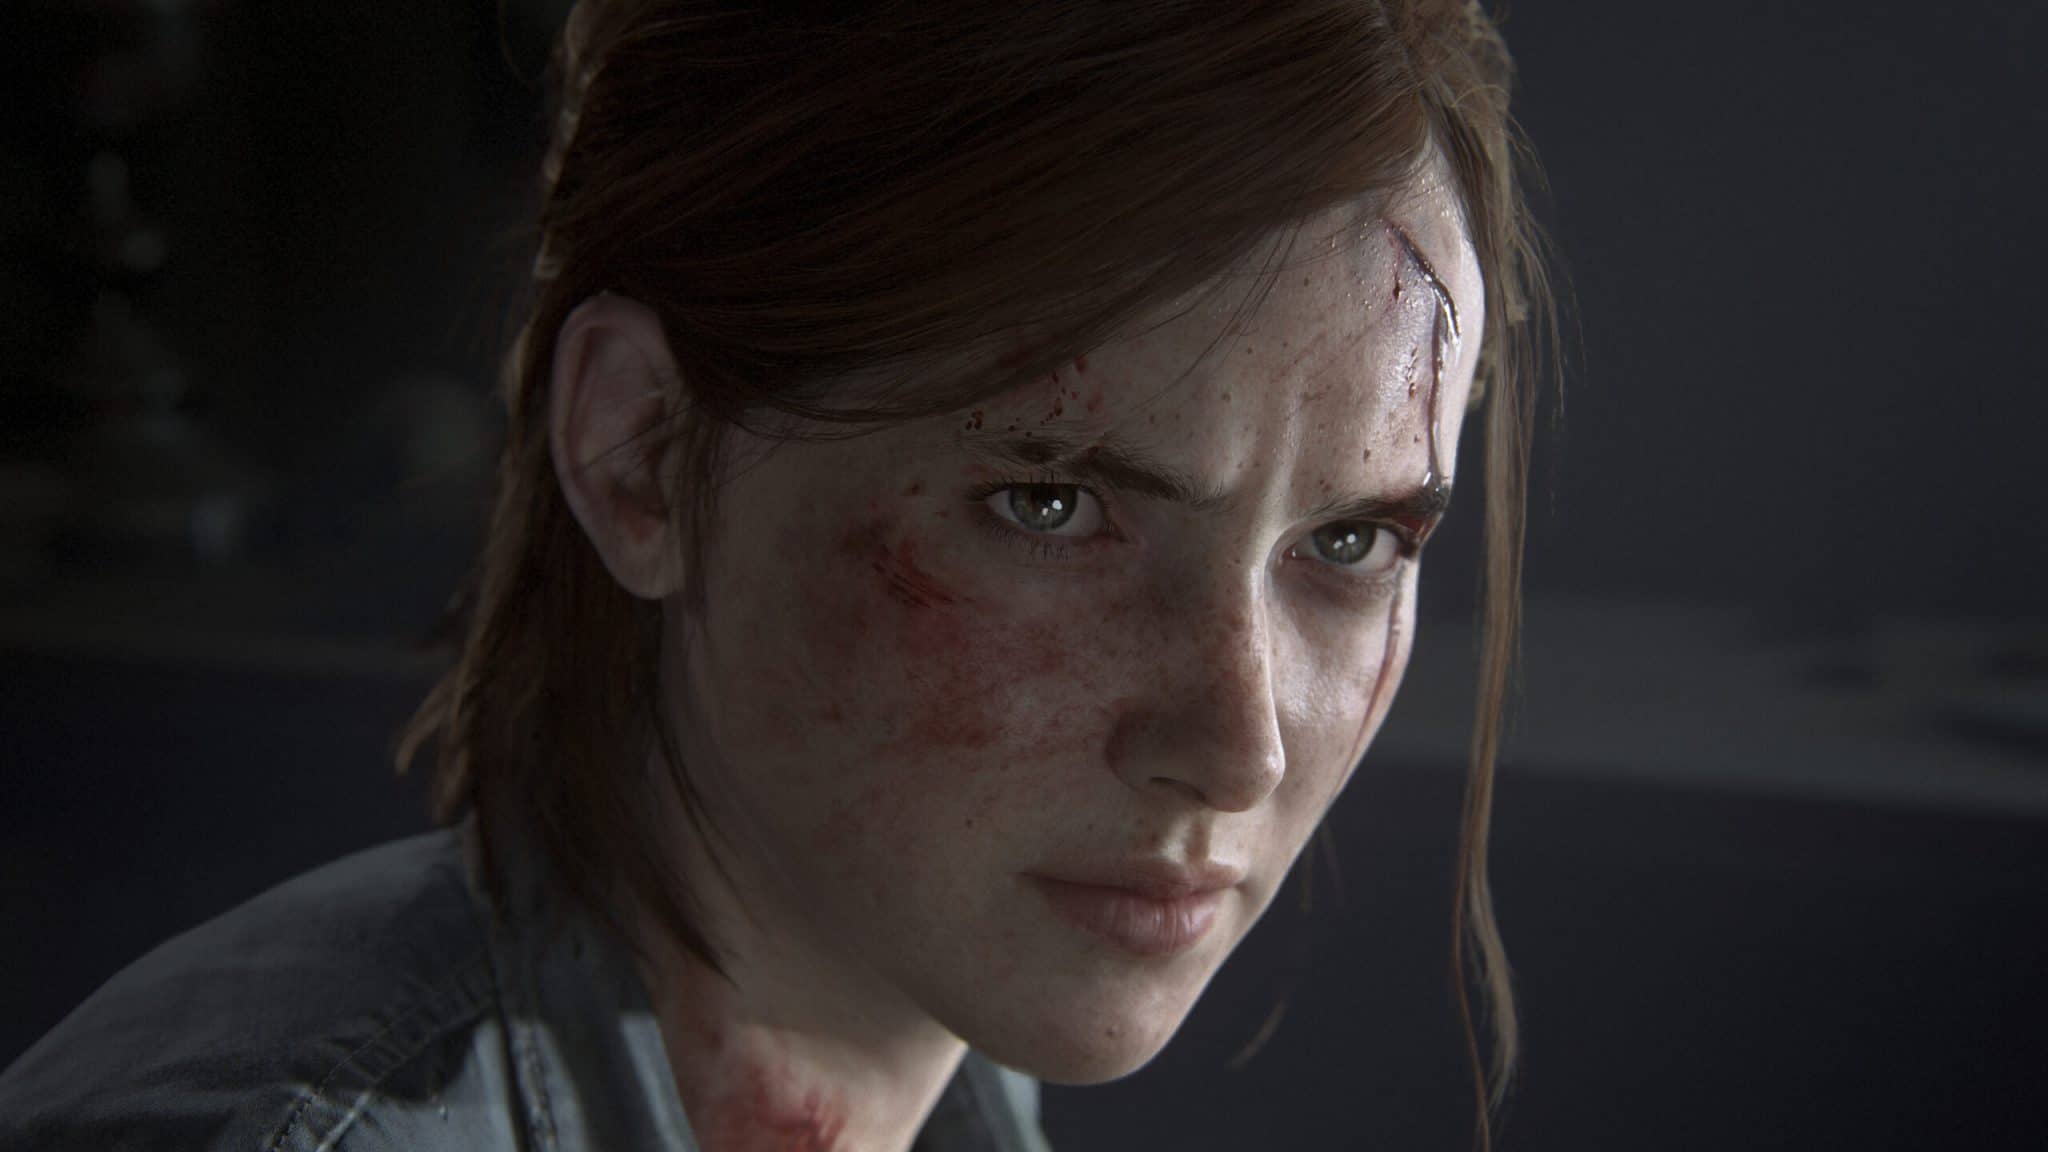 The Last of Us Part II Details Update Coming Later This Week Adds Permadeath and New Modes in Trailer